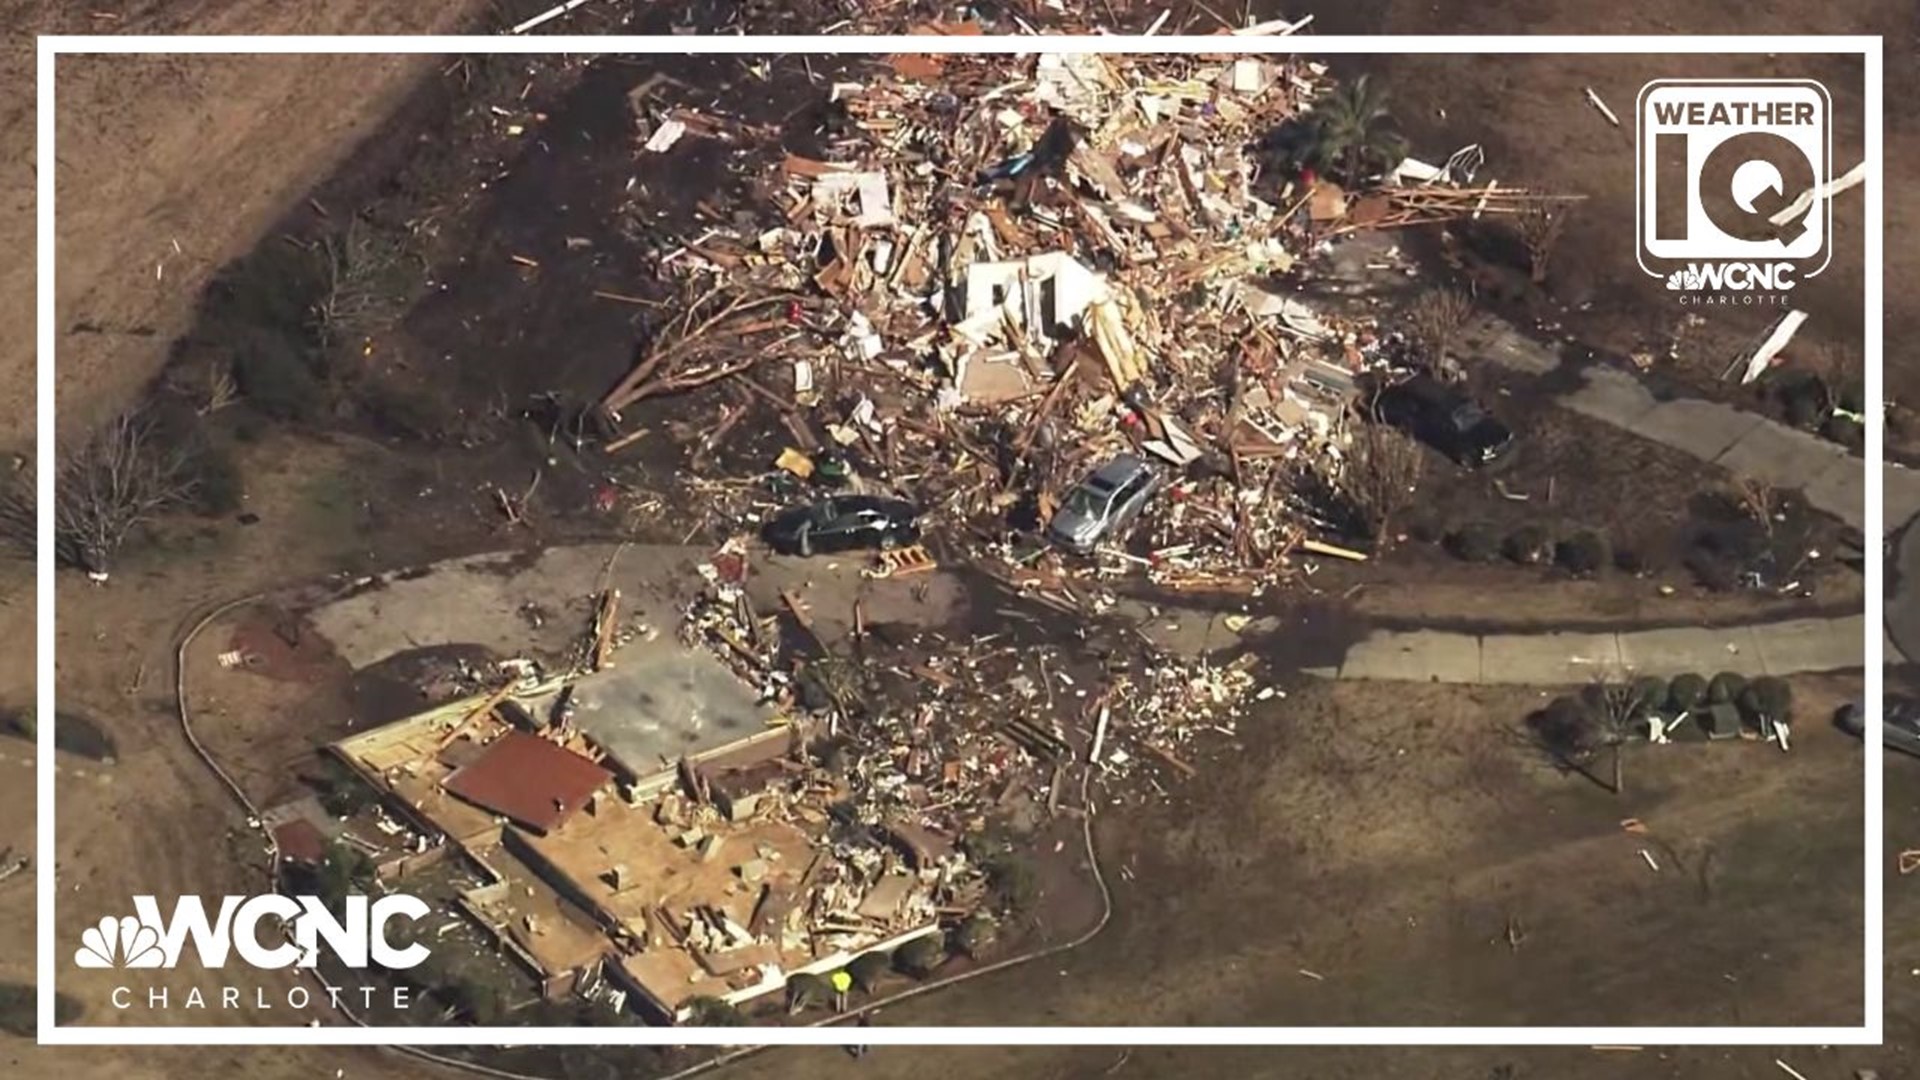 April and May are responsible for around one-third for tornadoes in the Carolinas. Here's a look at some of North Carolina's most destructive storms.